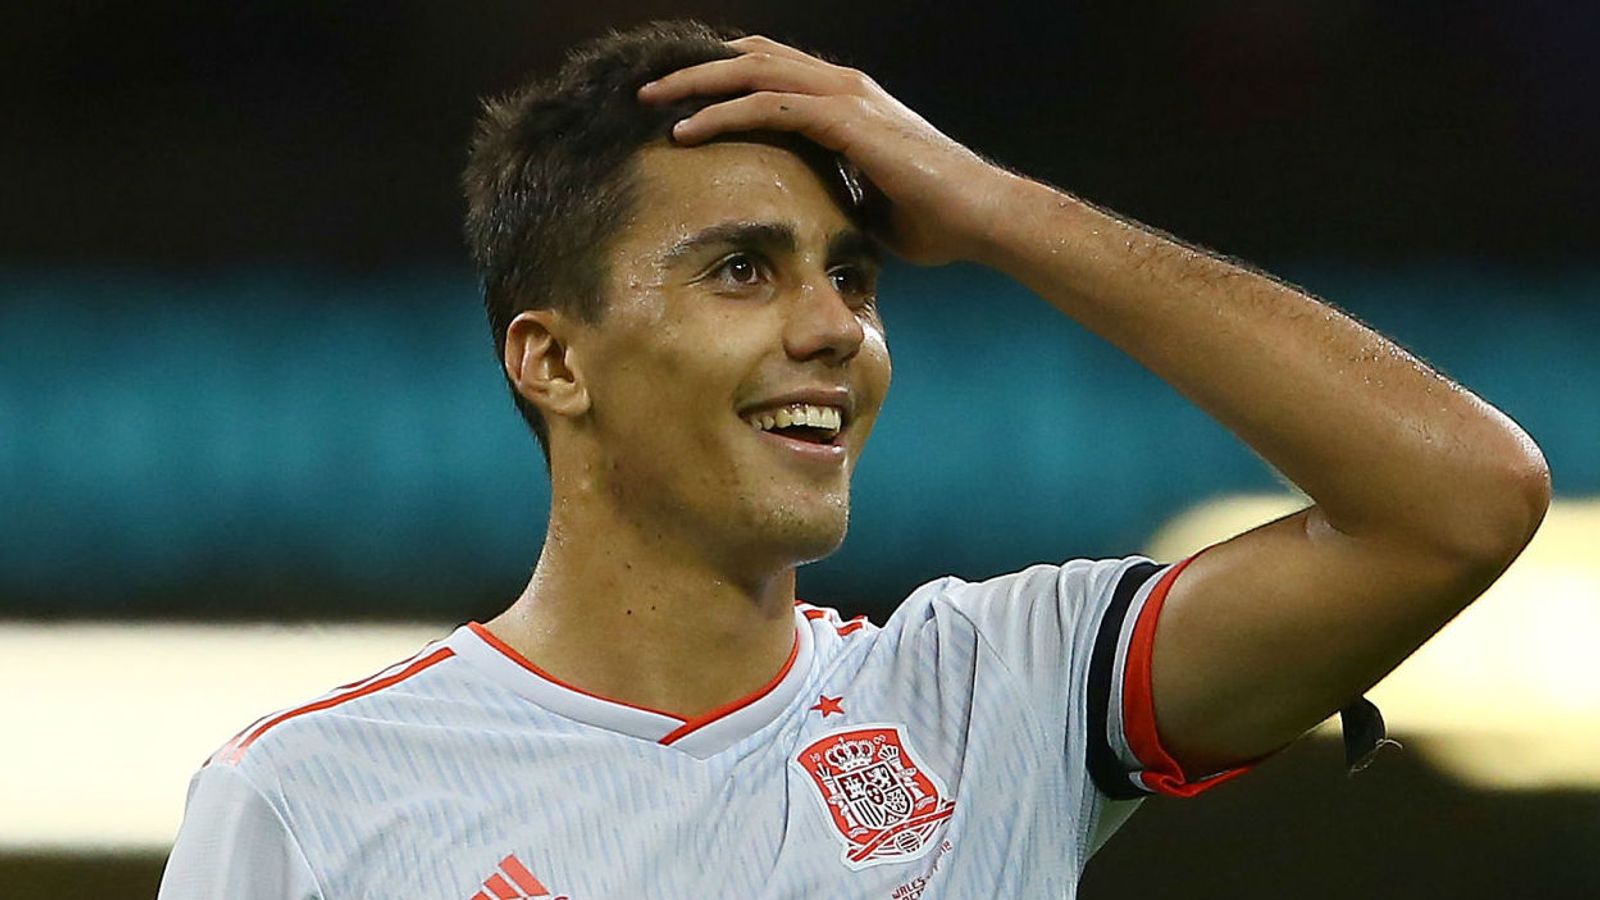  Rodri celebrates after scoring a goal for Spain during a 2019 European Qualifier against Wales.